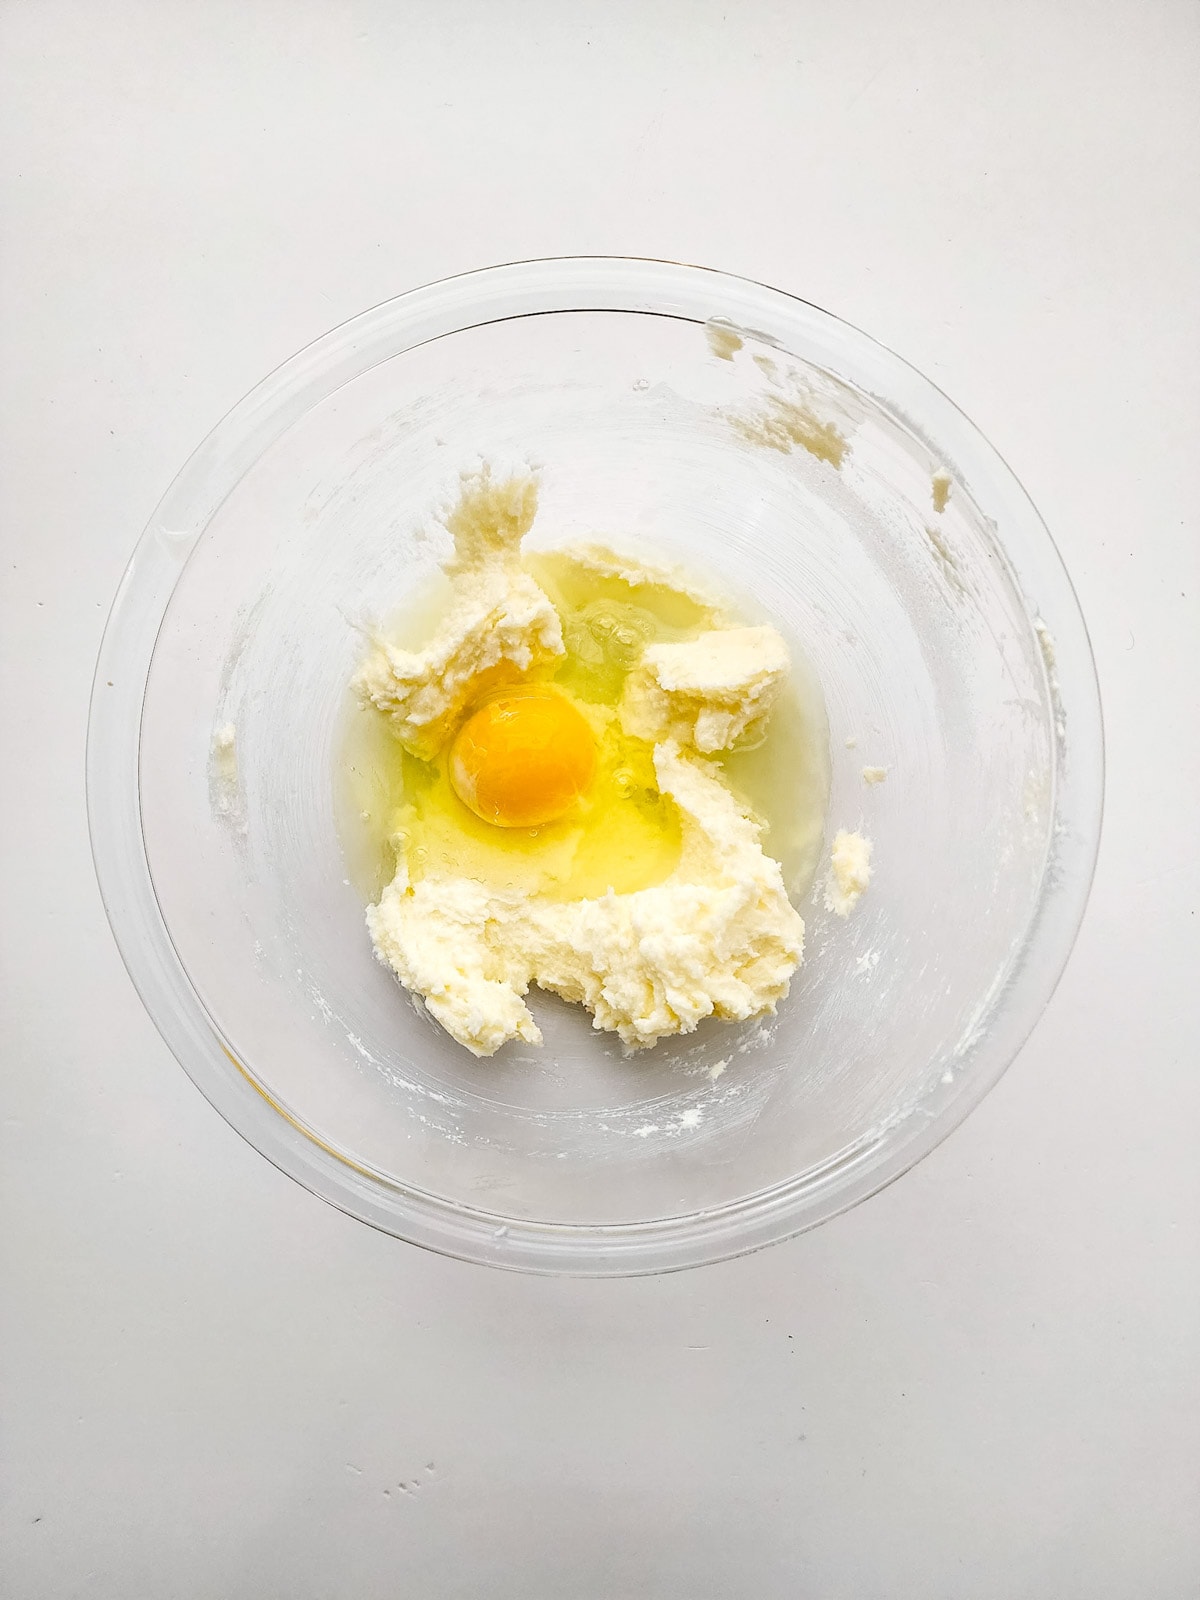 Egg and lemon juice with sugar mixture in glass bowl